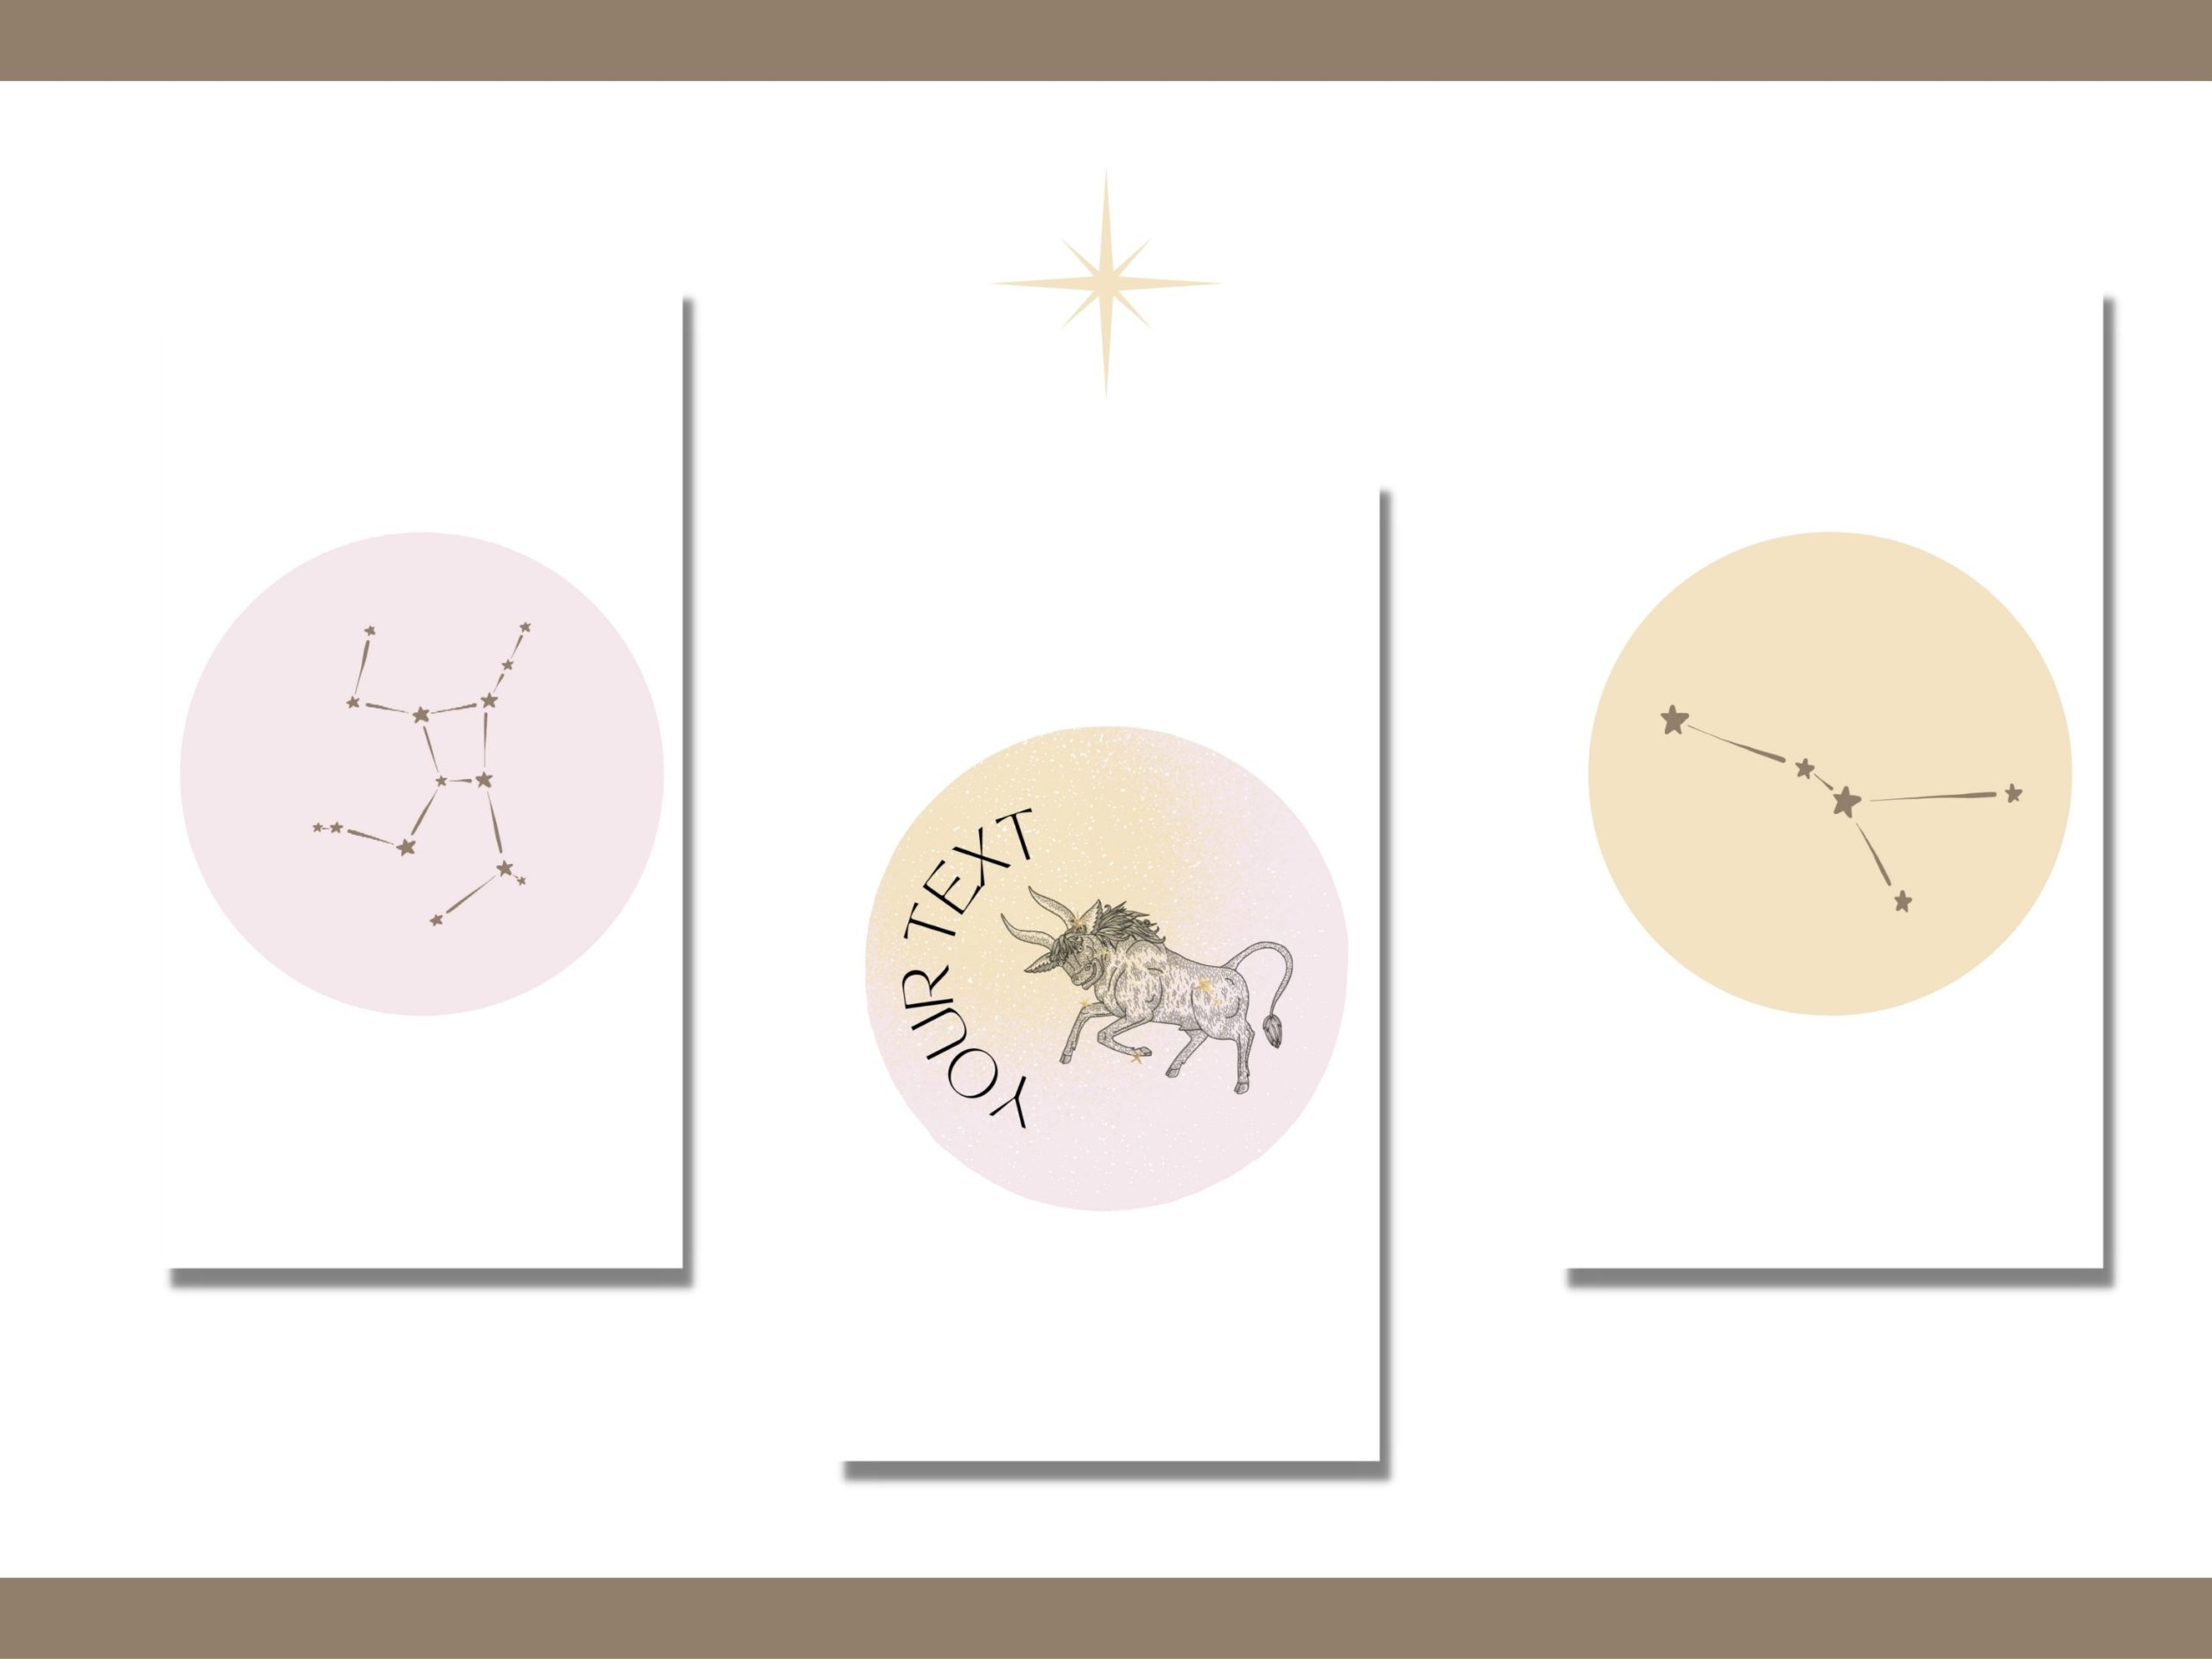 Zodiac Signs Instagram Highlight Covers Templates